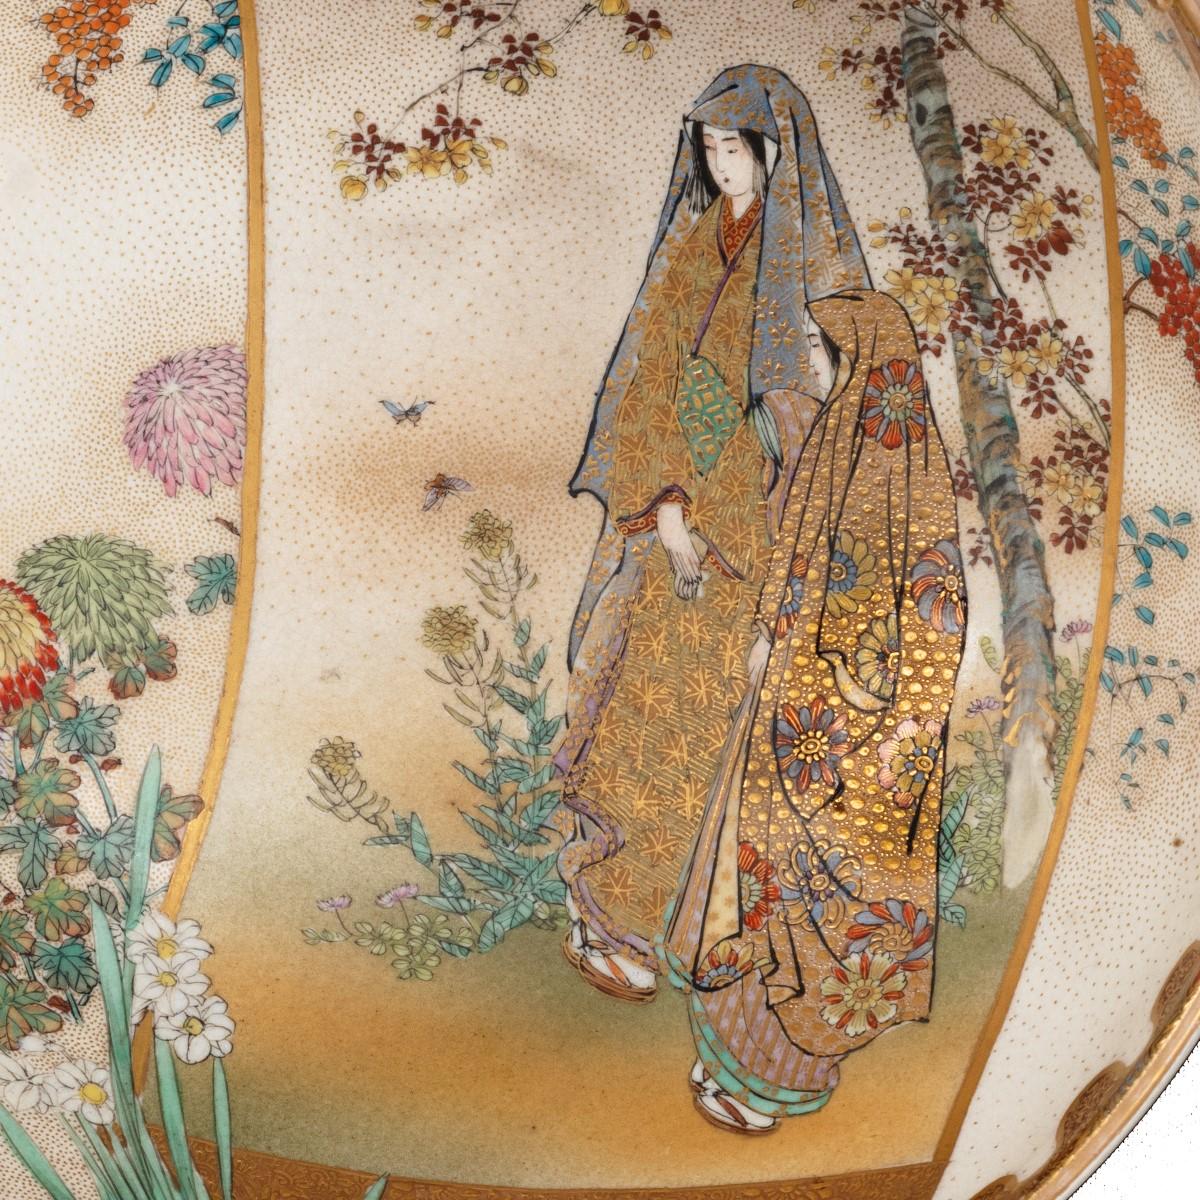 A Meiji period Satsuma earthenware bowl, painted in coloured enamels and over-glaze gilding with two ladies wearing brocade robes in a framed panel against flowering plants on a gold-stippled ground, the exterior with a continuous comb-tooth